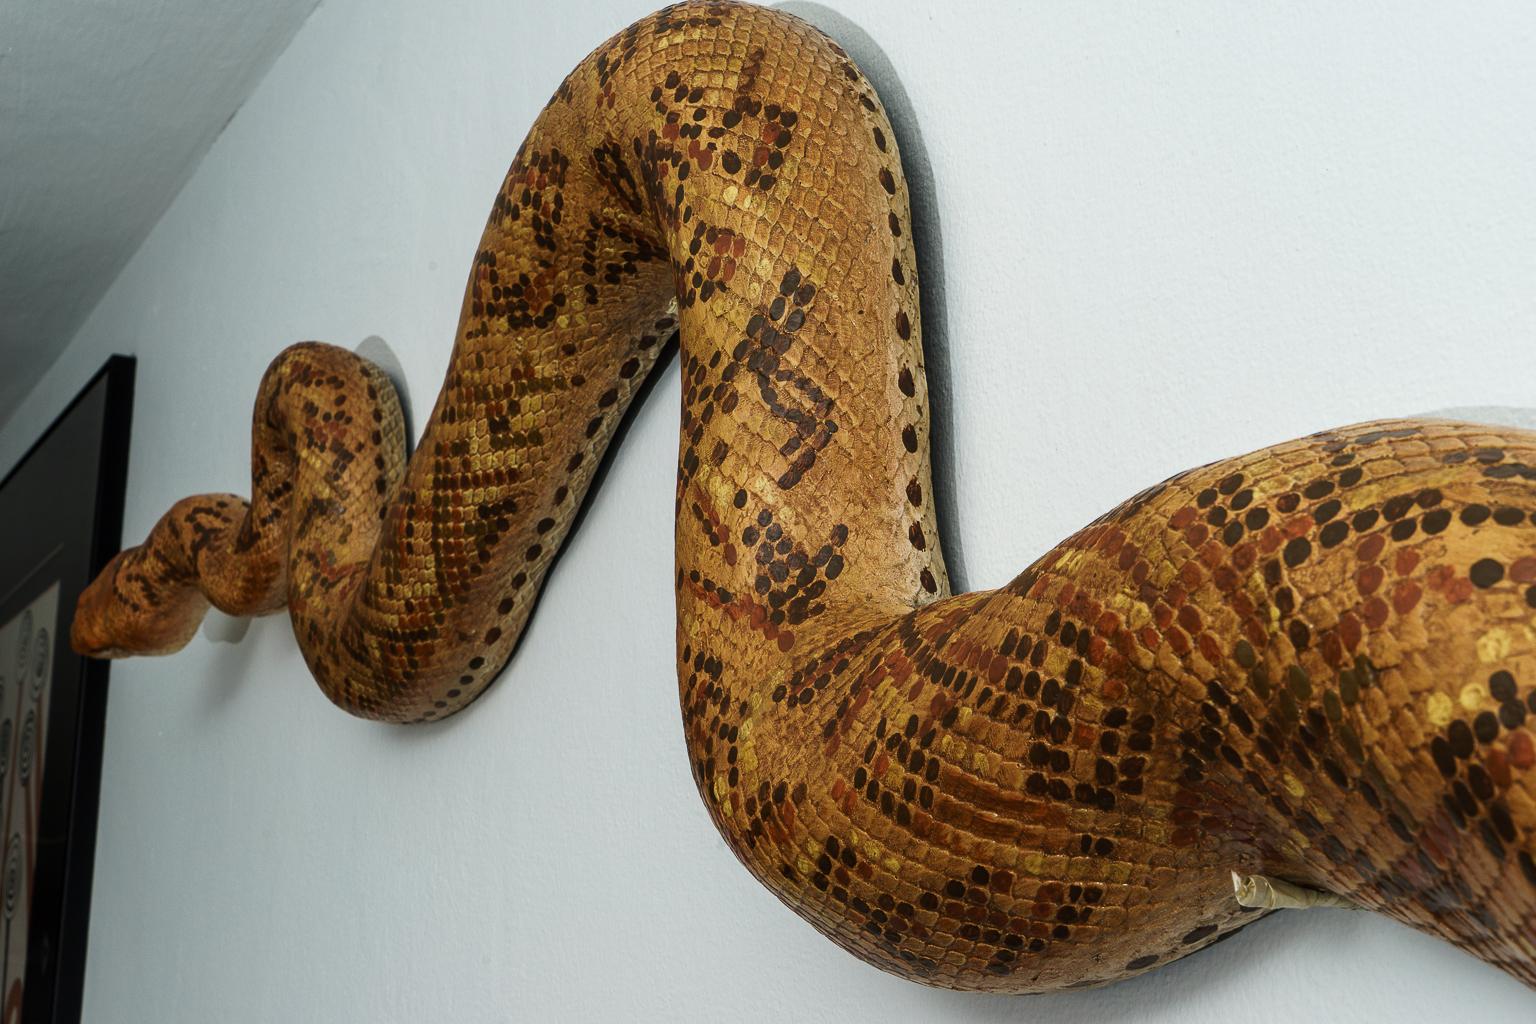 Large Scale Sculpture of a Boa Constrictor 1